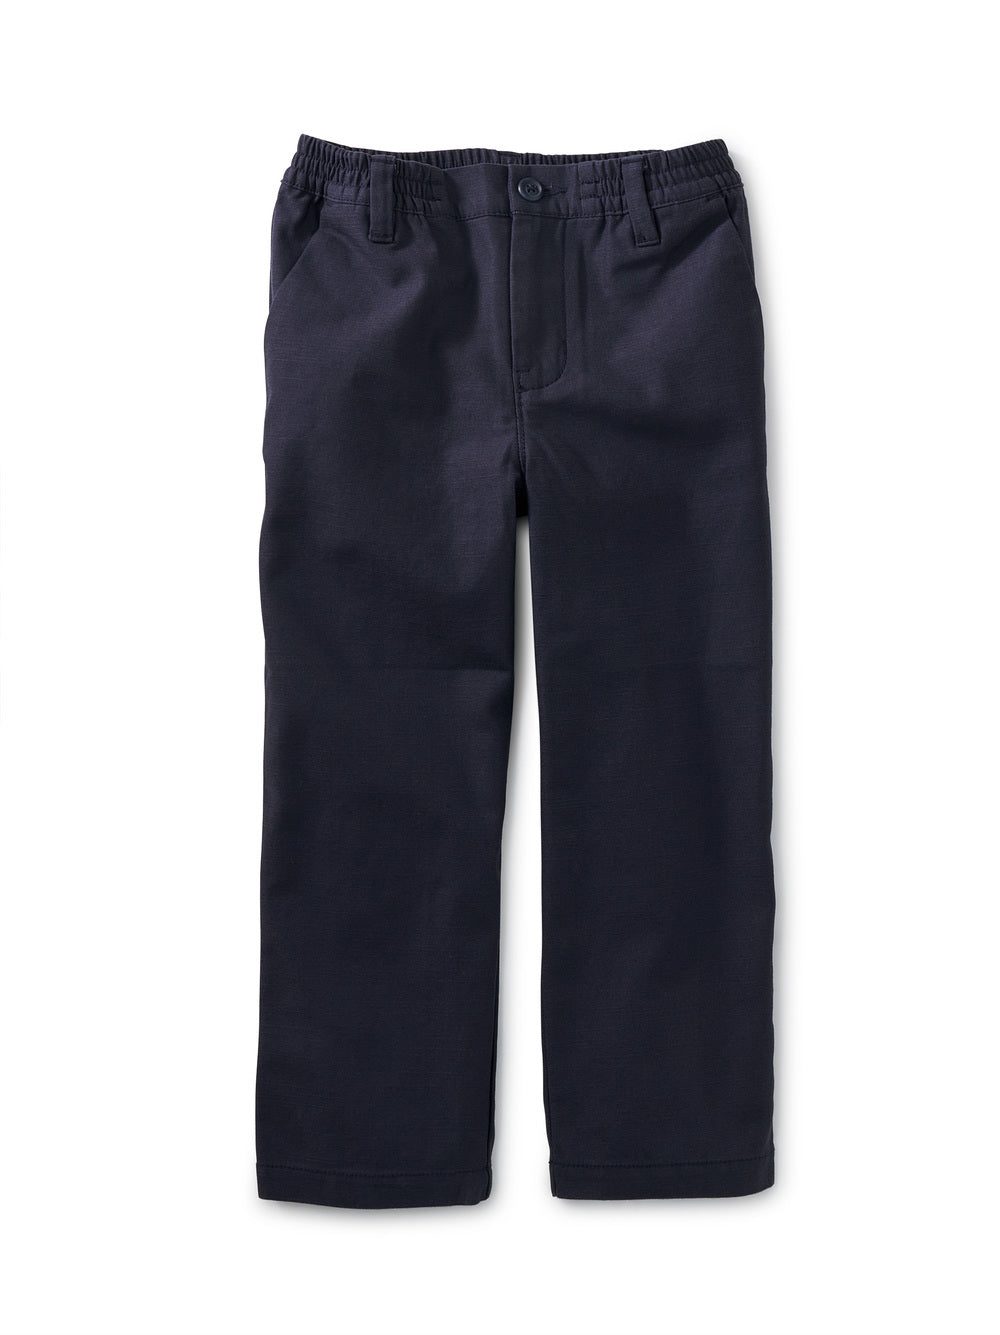 Relaxed Fit Twill Pants in Navy